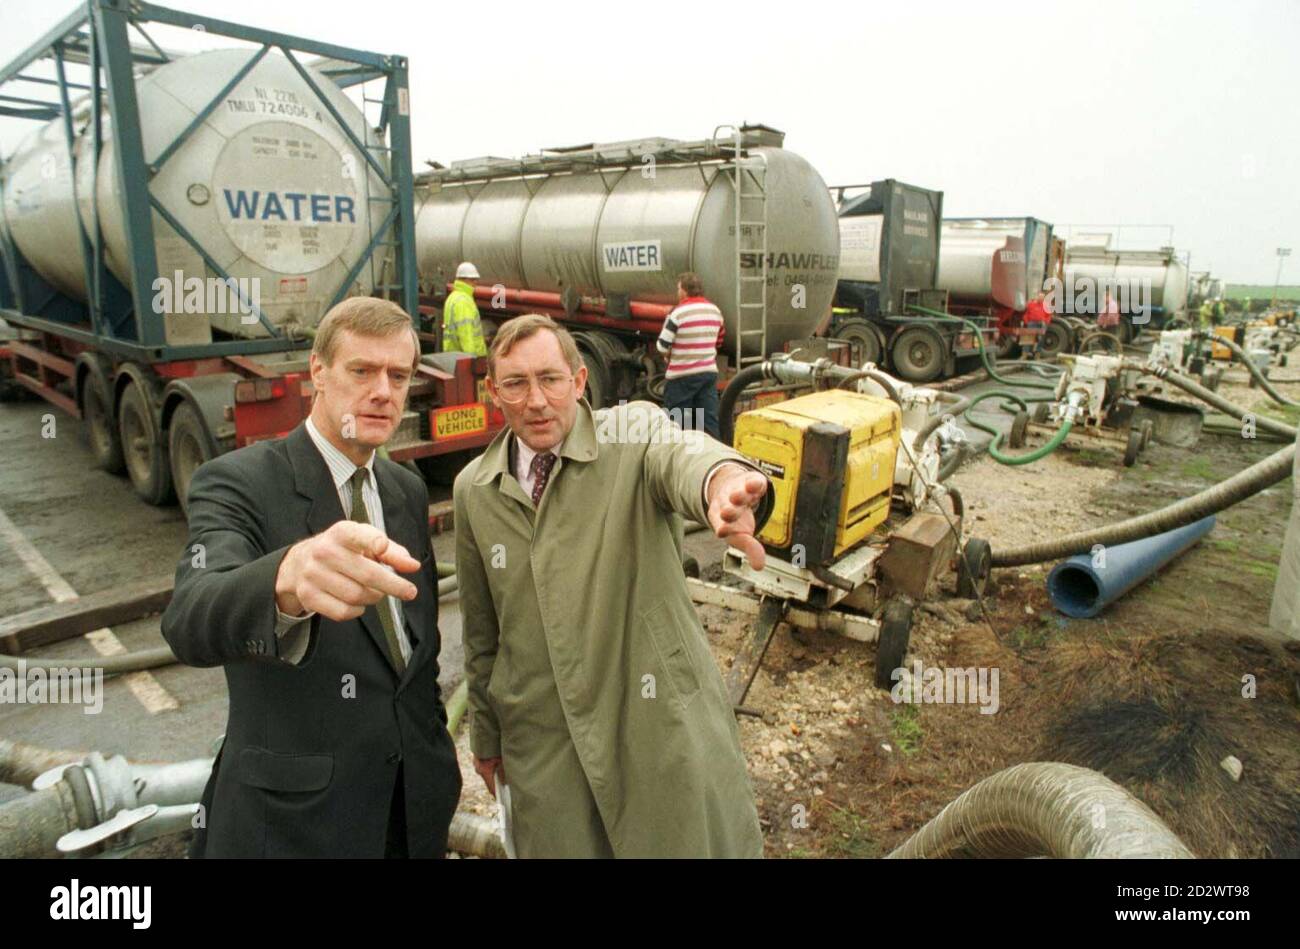 Colne Valley M.P. Graham Riddick (l) and Environment Minister David Curry (r) survey the massive water tankering operation at Scammonden Reservoir in West Yorkshire. Stock Photo